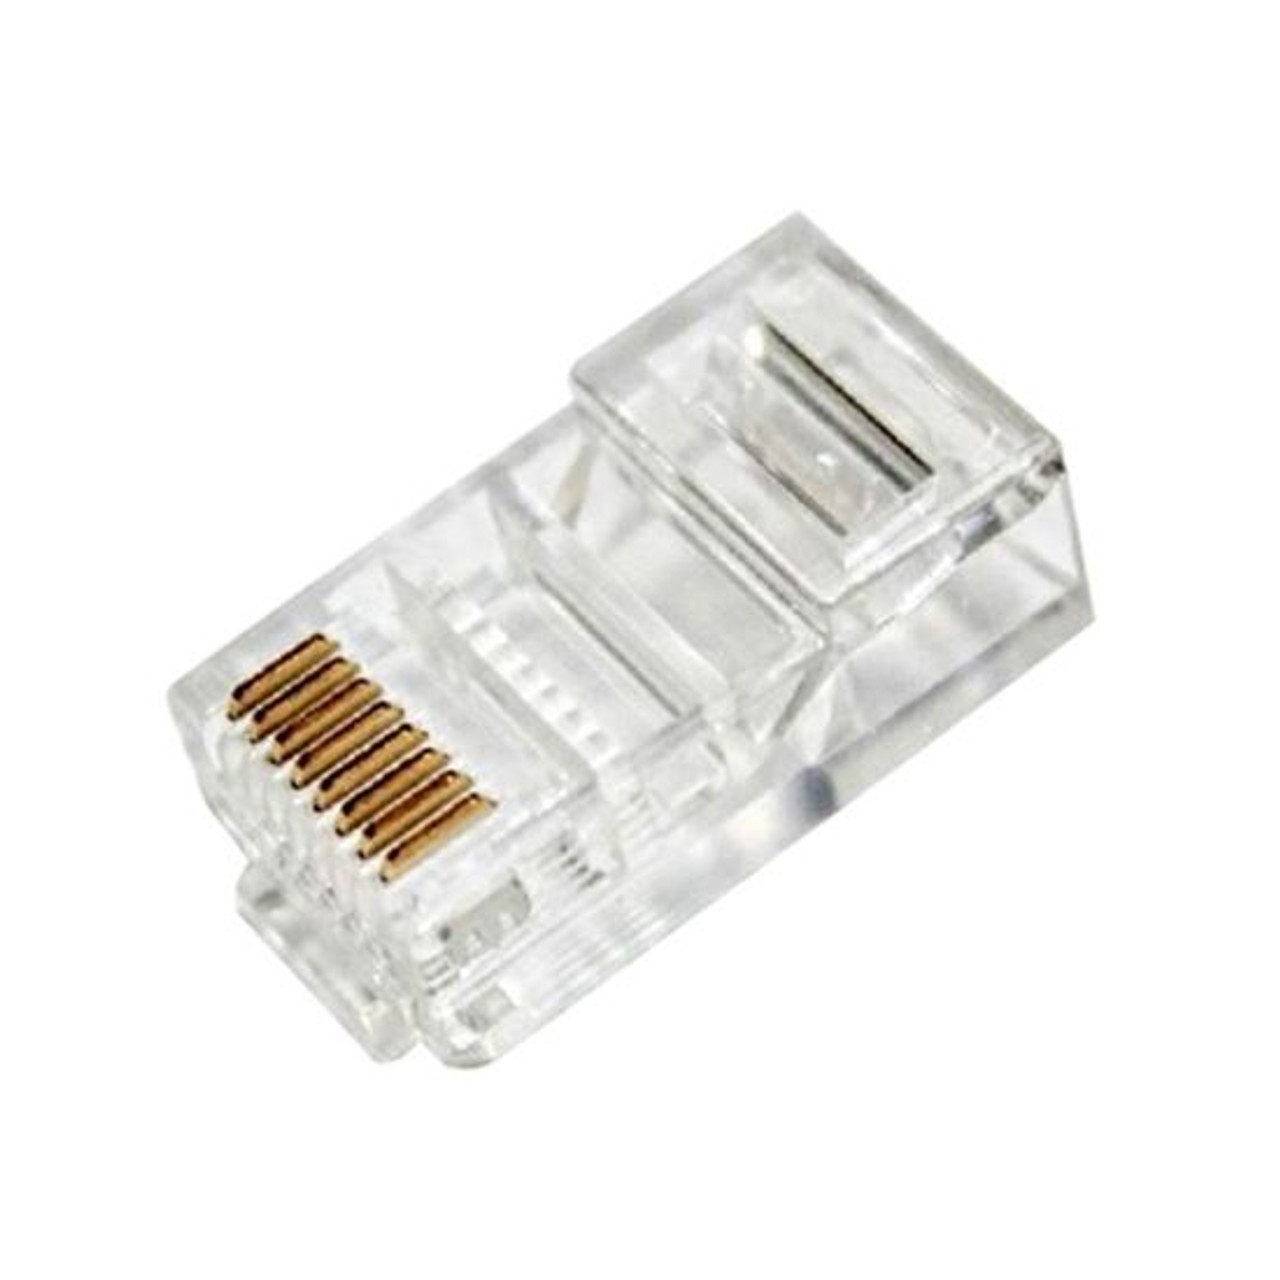 ASKA TMP-8F1 RJ45 Plug Connector CAT5E Round Solid Gold Plate 50 Micron Contacts Round Solid 8P8C RJ-45 1 Pack Male Network Single 8 Pin Network Computer Ethernet Data Telephone Line Plug